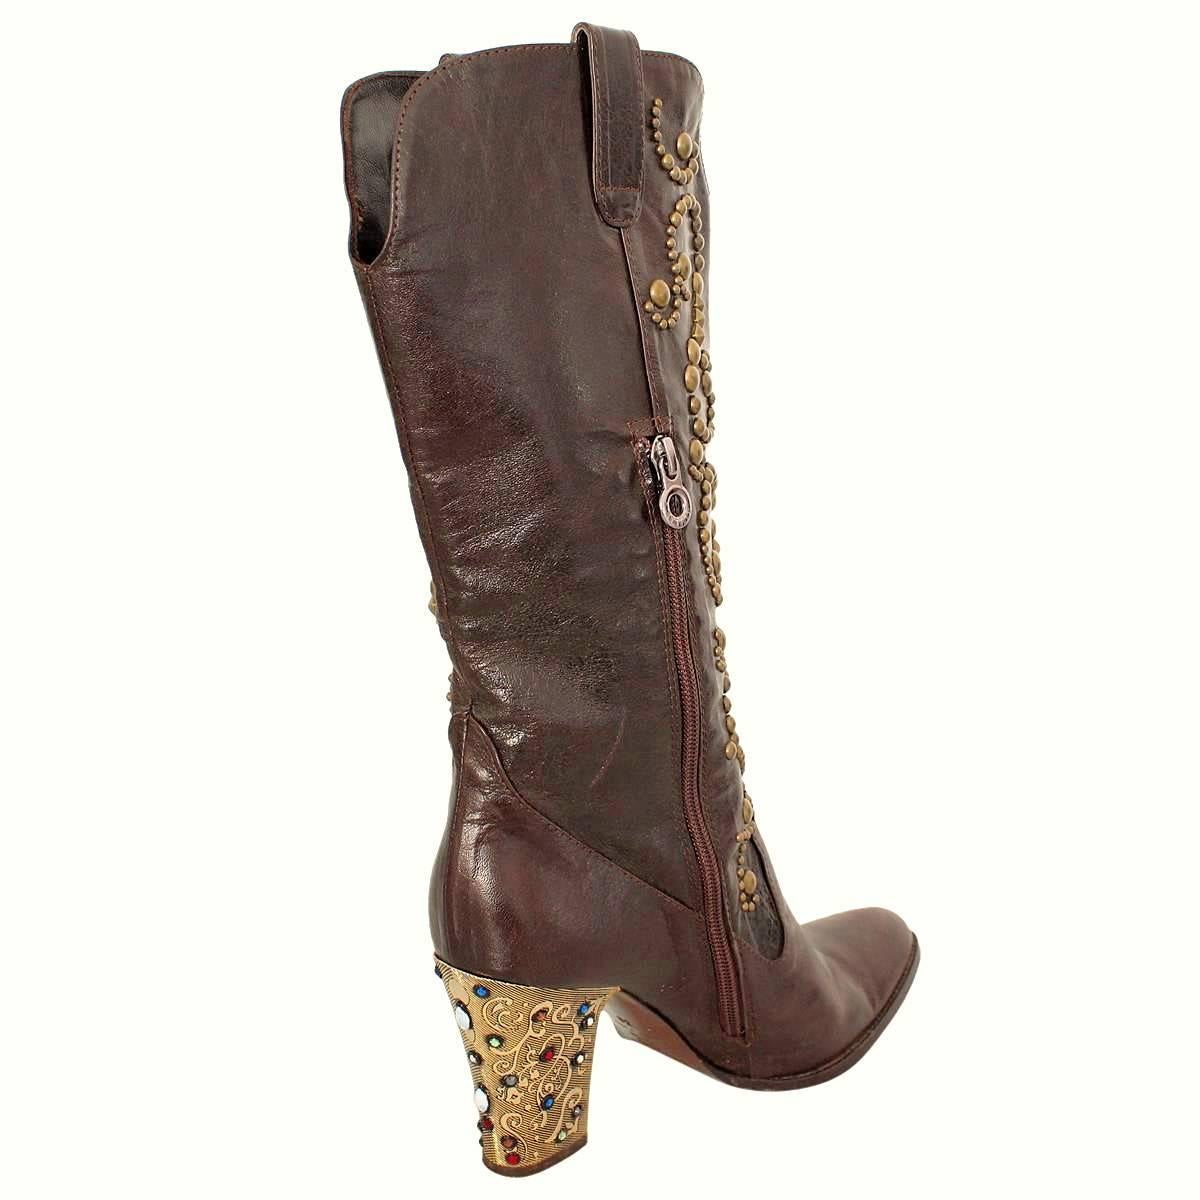 Magnificent boots by italian designer Le Silla
Leather
Dark brown color
Bronze colored studs applicated
Magnificent golden heel with colored crystals
Heel height cm 8,5 (3.34 inches)
Made in Italy
Worldwide express shipping included in the